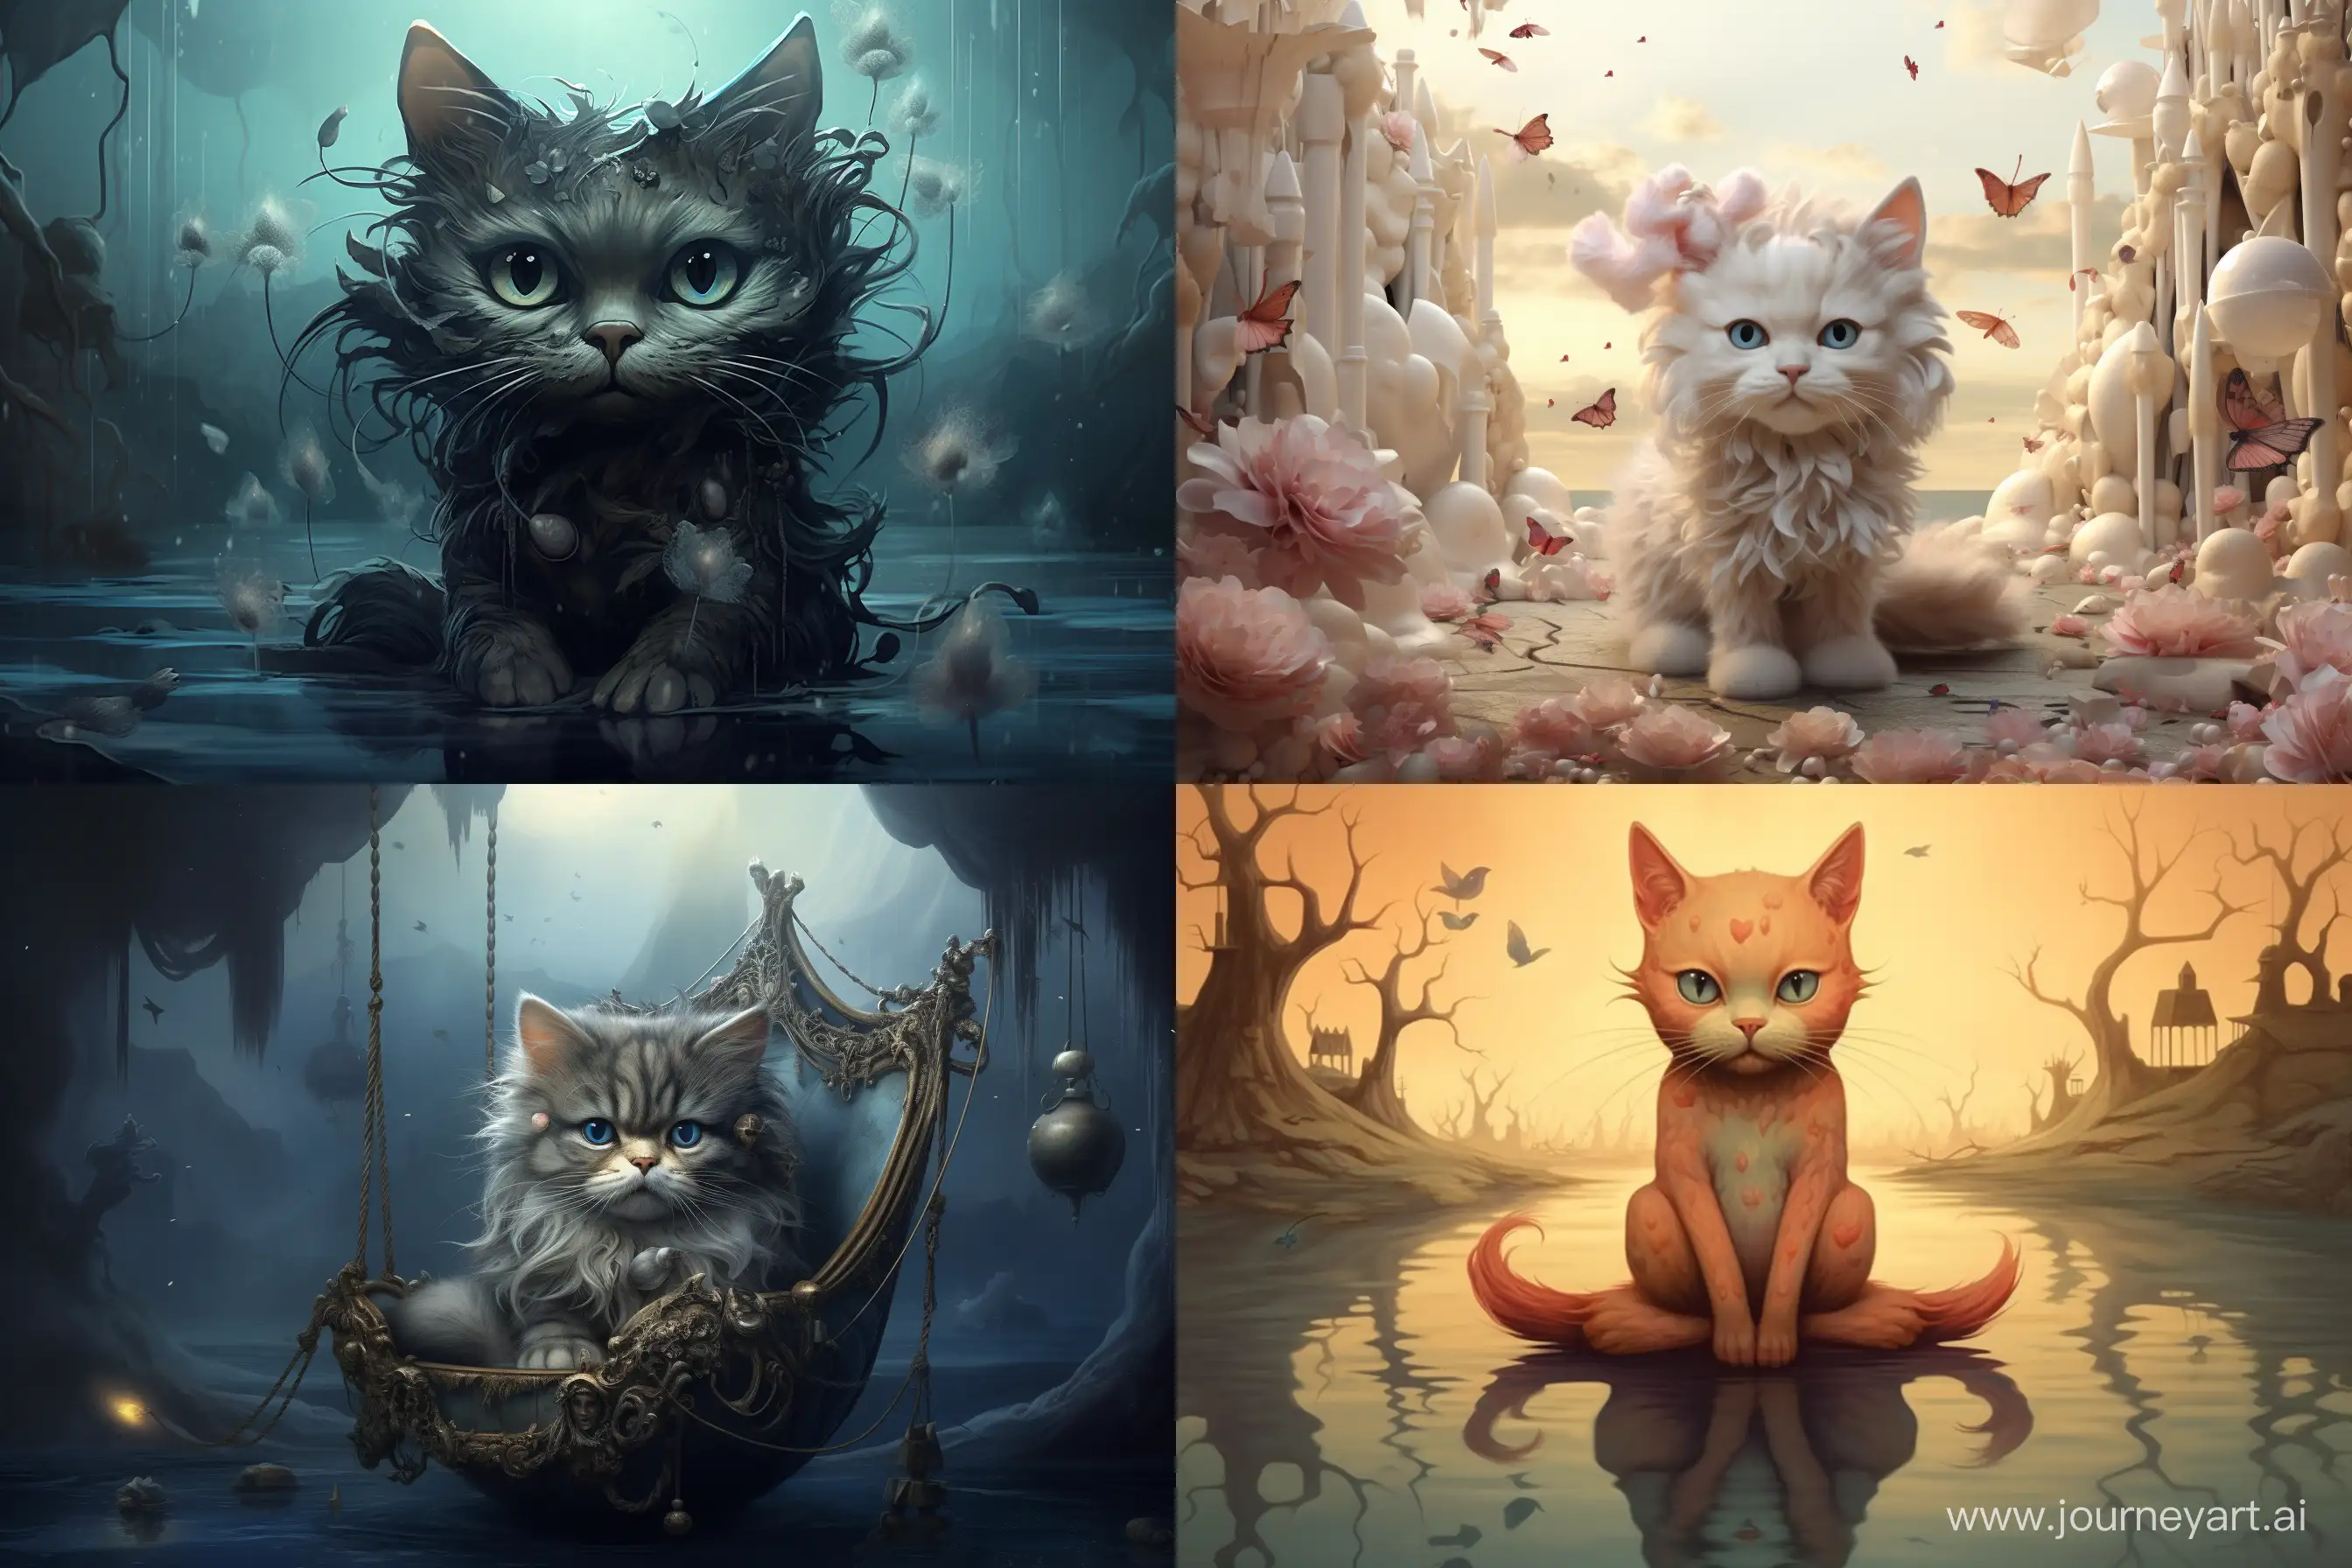 Dreamlike-Surreal-Kitten-Illustration-with-Unexpected-Elements